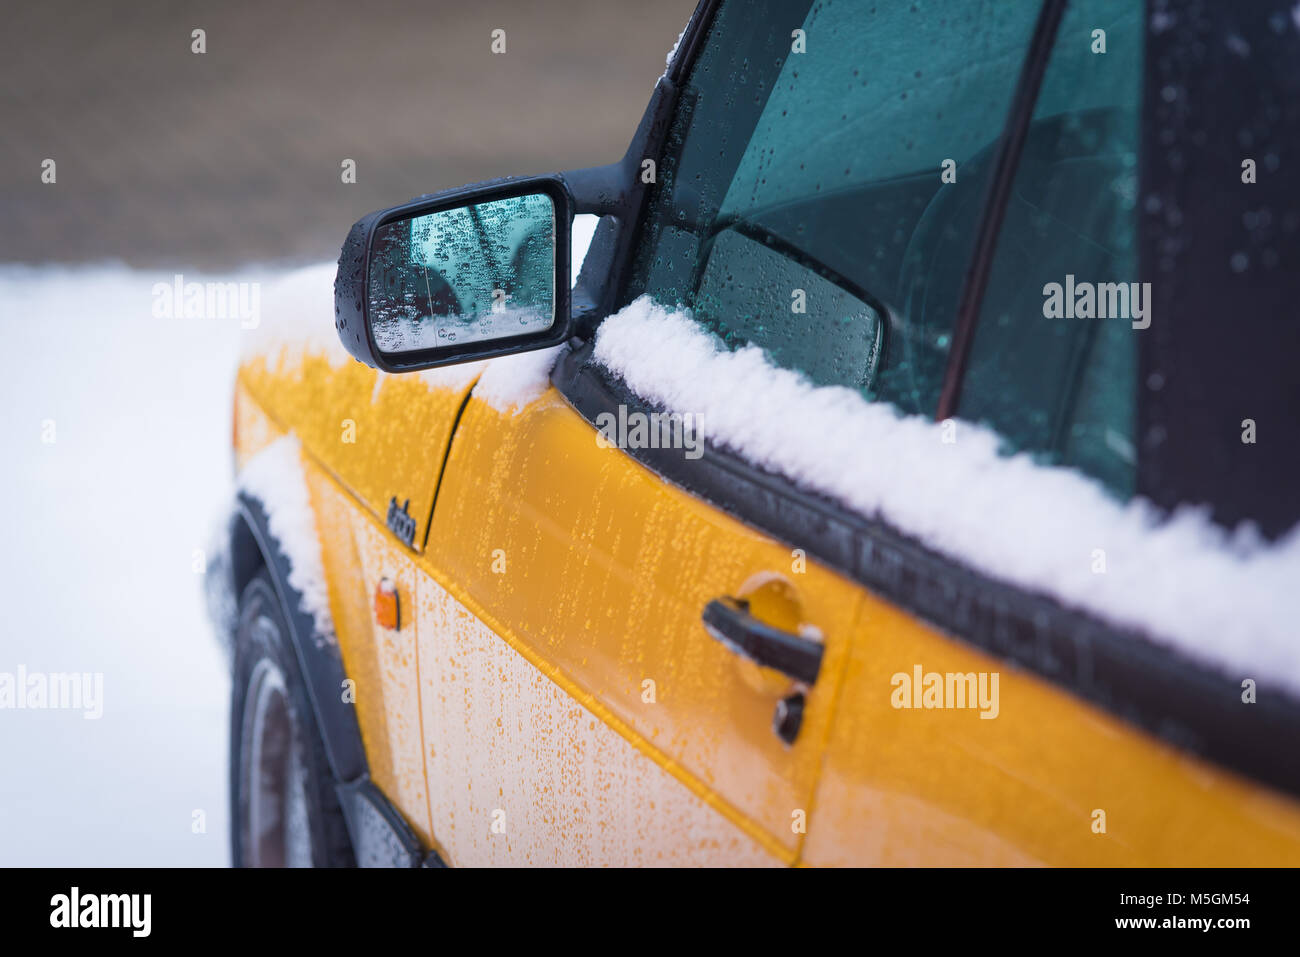 OLDENZAAL, NETHERLANDS - JANUARY 15, 2017: Detail of a yellow vintage Saab 900 turbo S convertible in snowy conditions. Stock Photo